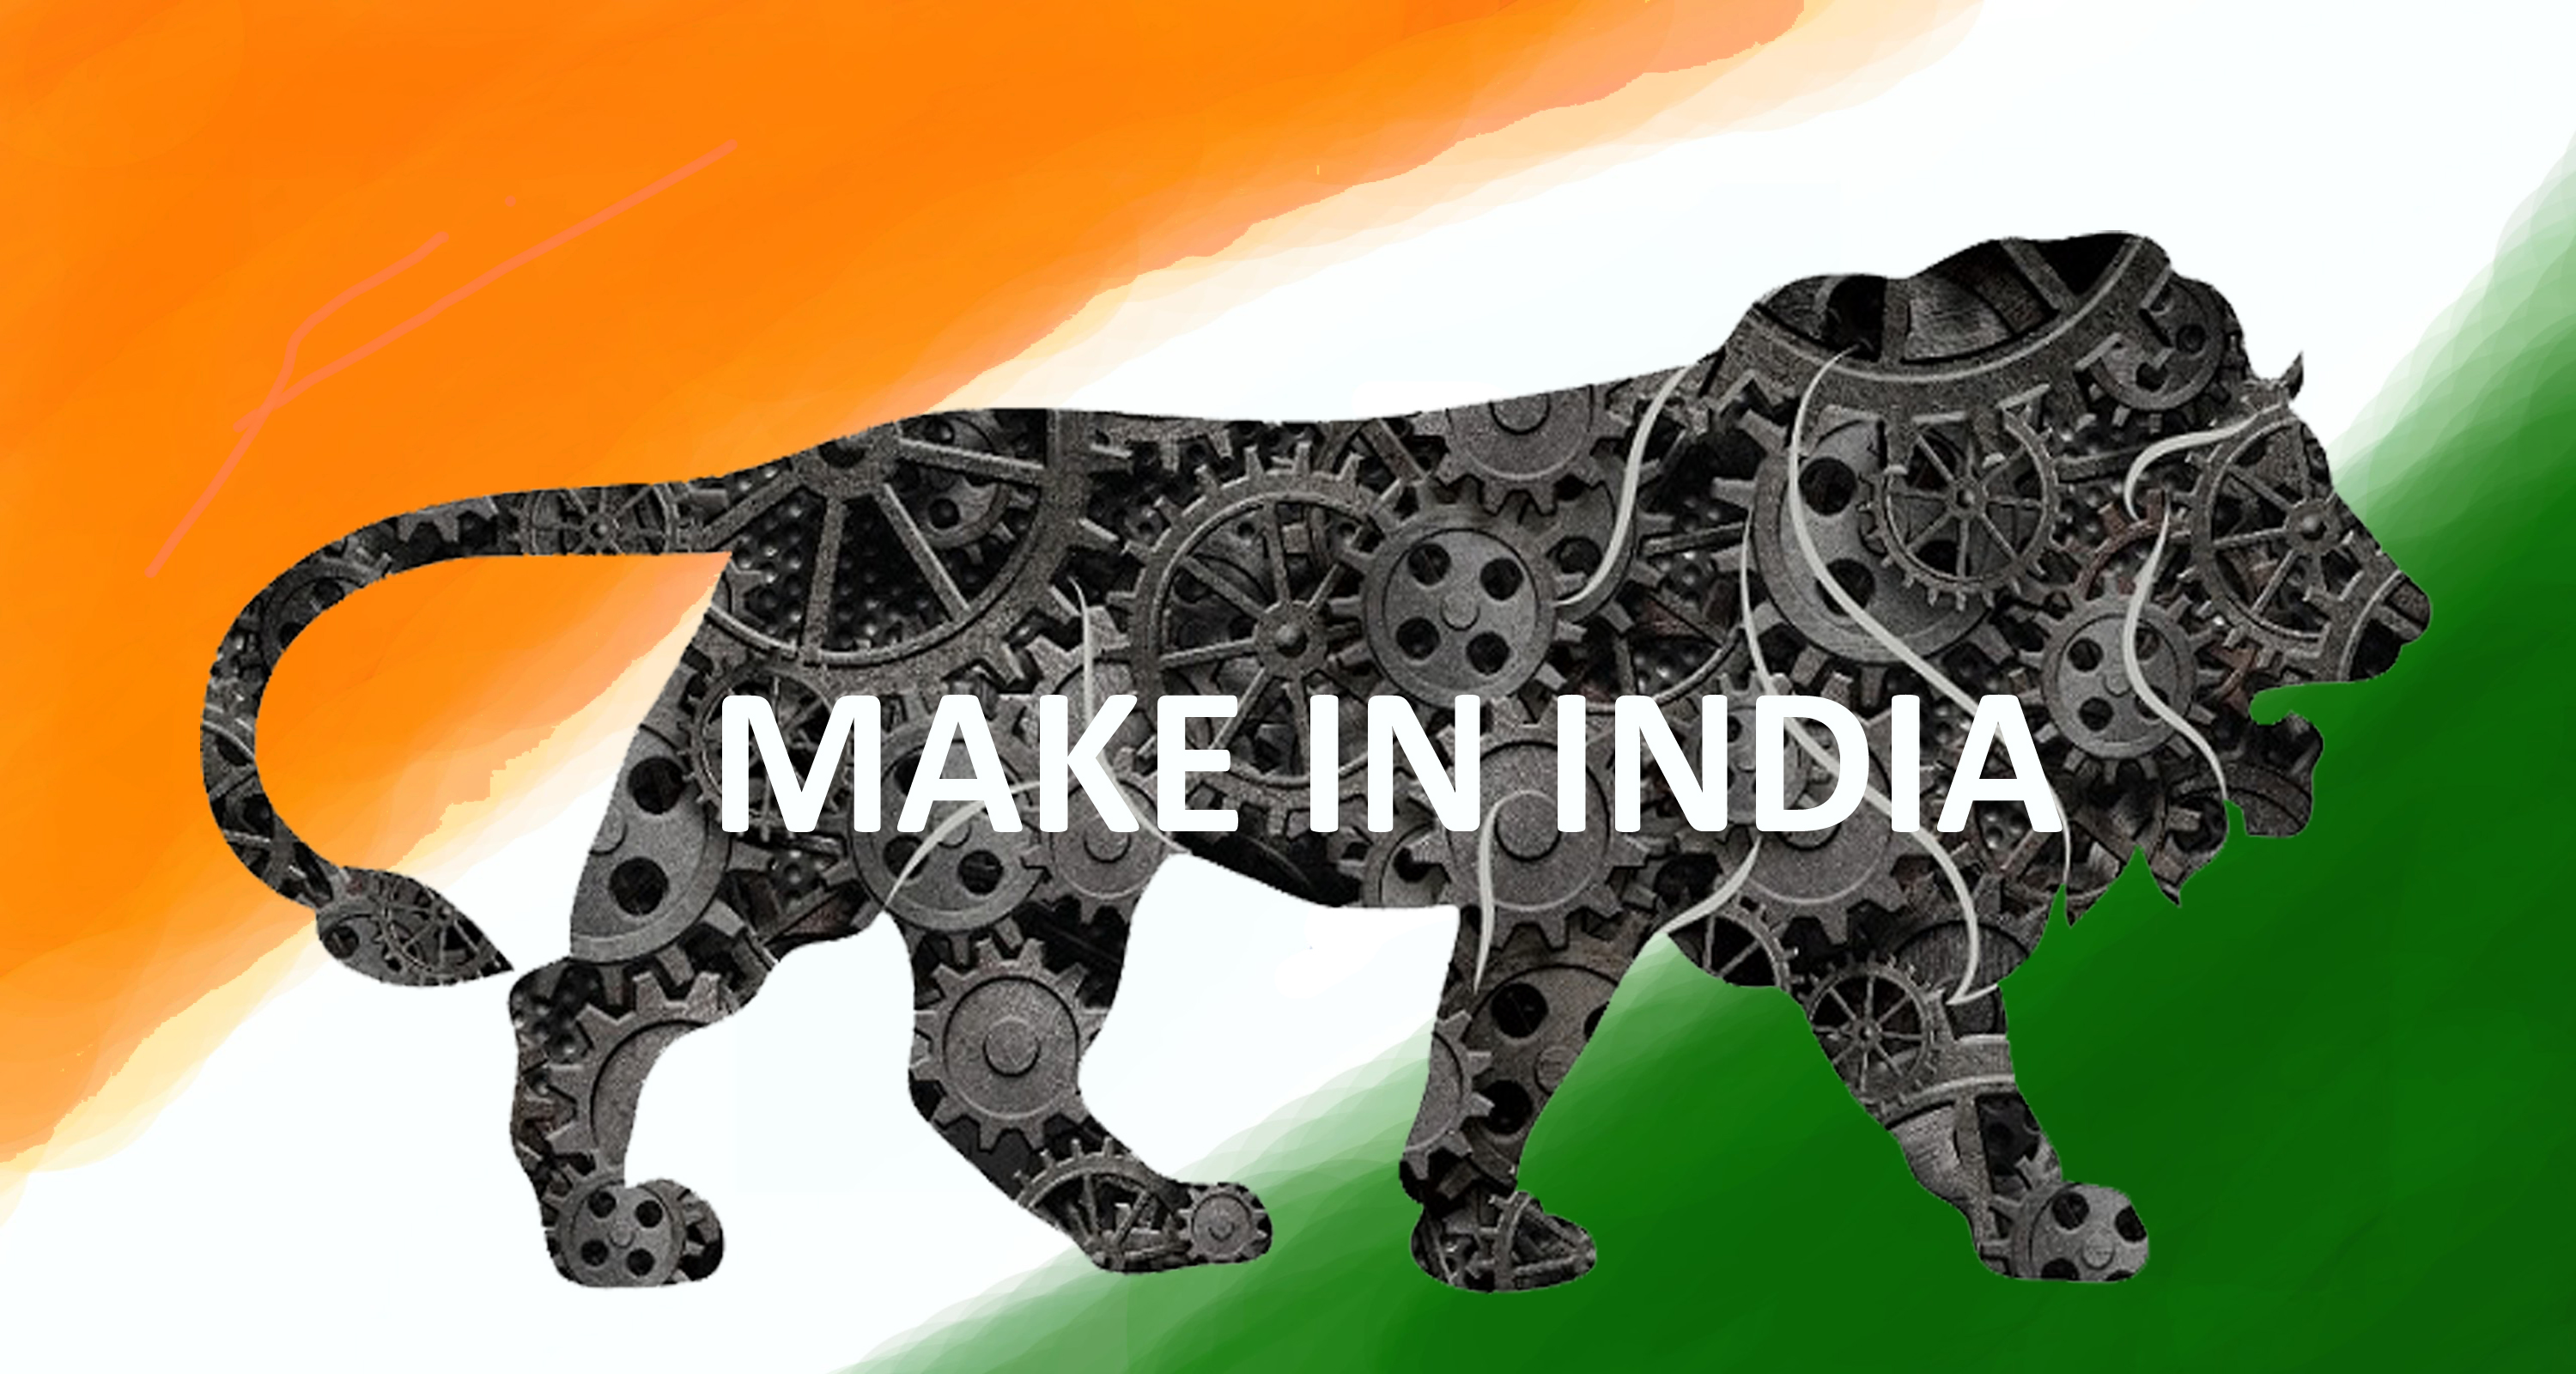 essay on make in india in hindi